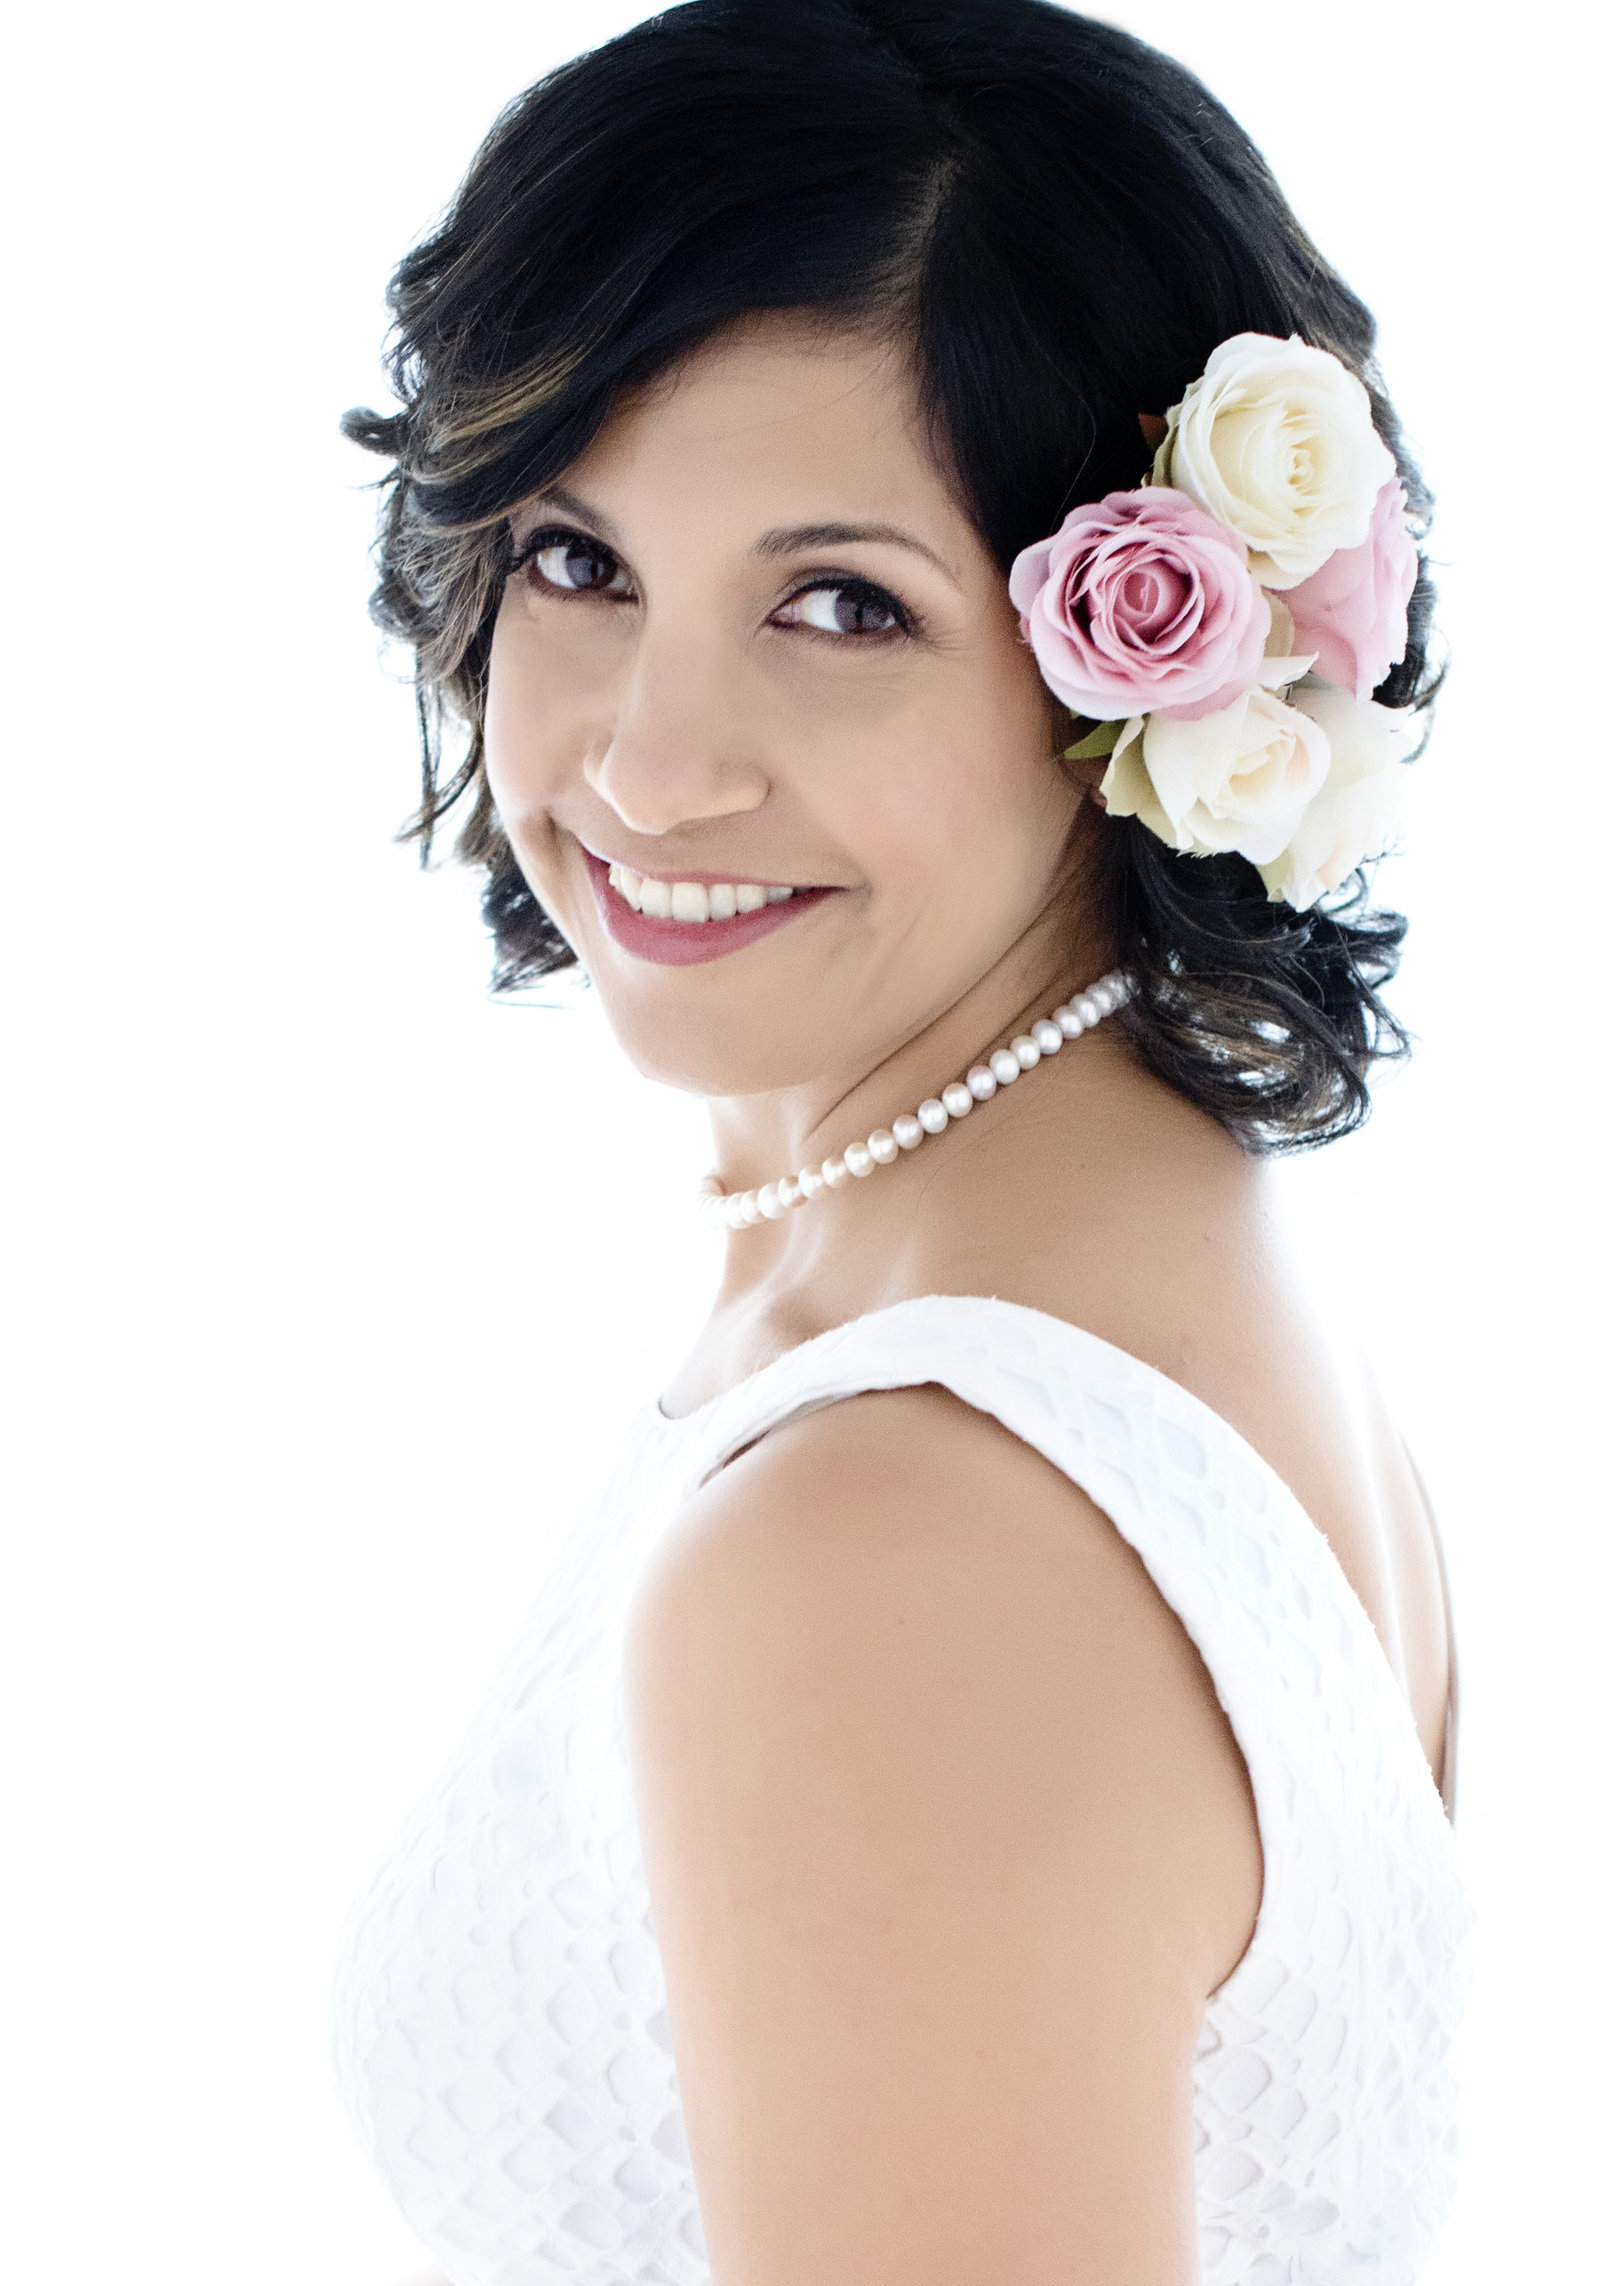 branding photo portrait of a woman looking in the camera and  smiling with  flowers in the hair and  pearl necklace  with  white dress and  curly short hairiness Branding, Headshots, Makeover Photoshoots in Mississauga, Oakville, Milton, Burlington, Toronto, GTA